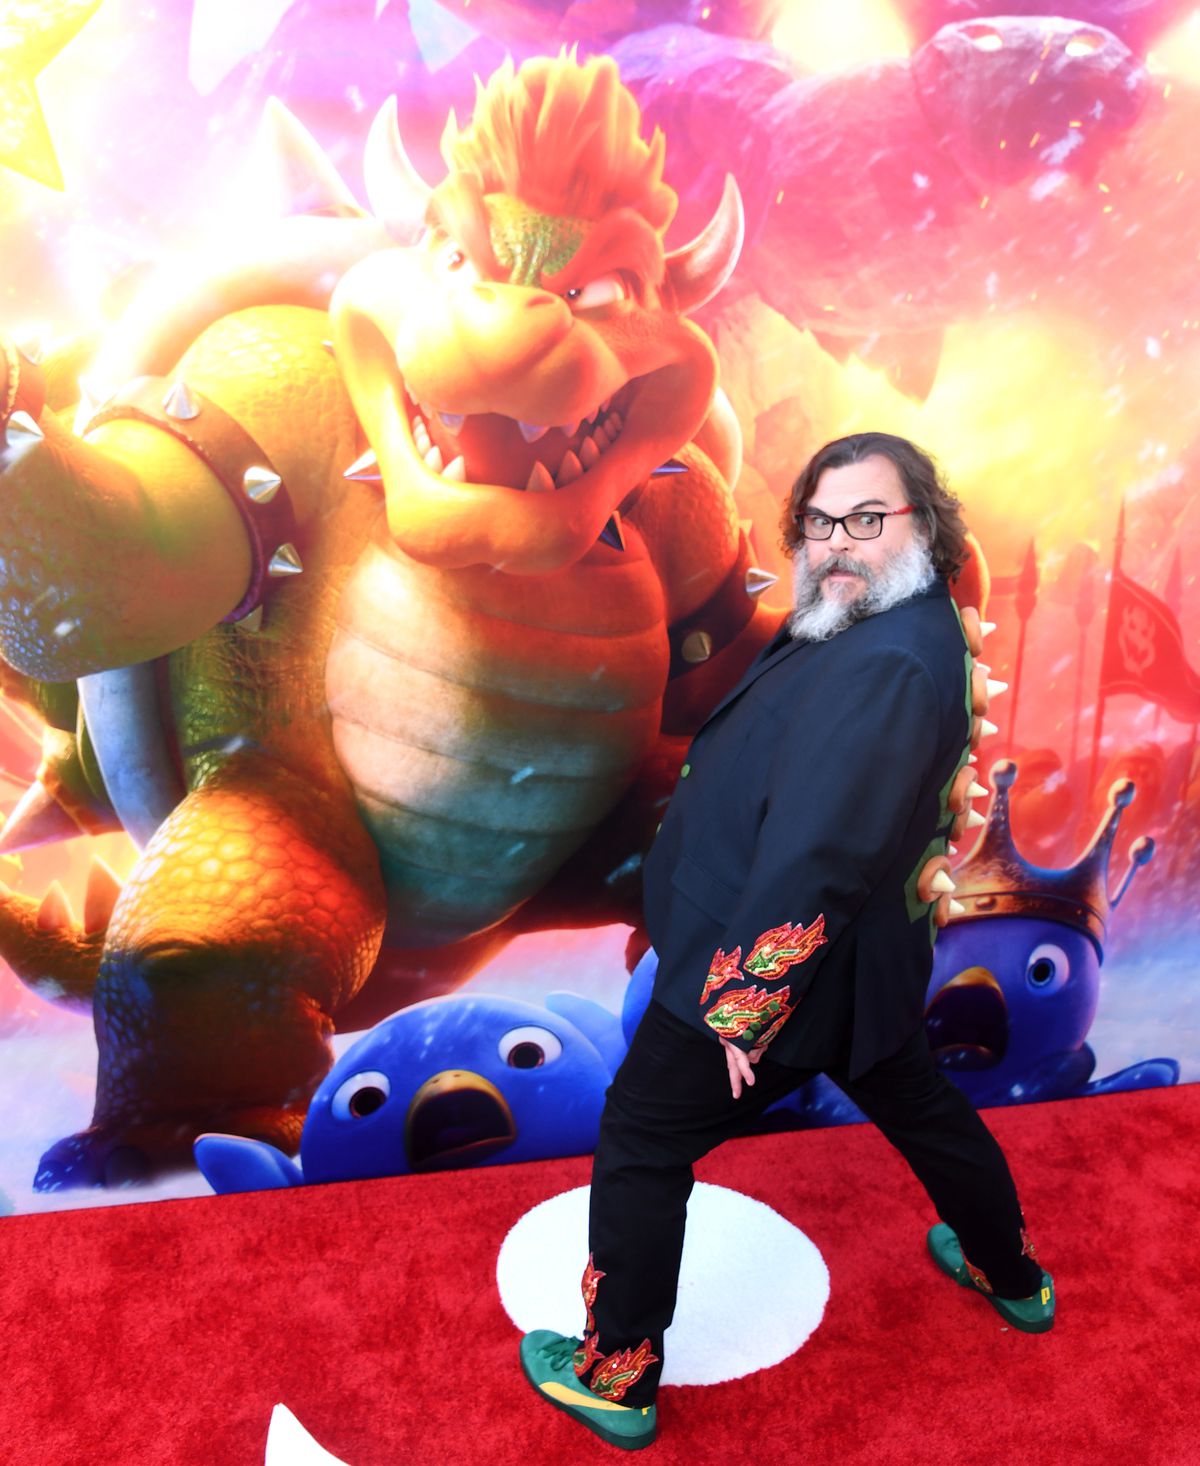 Jack Black poses on the red carpet at the LA premiere of The Super Mario Bros. Movie. He is wearing a suit with Bowser’s back spikes on it, with flame embroidery on the suit and pant cuffs.